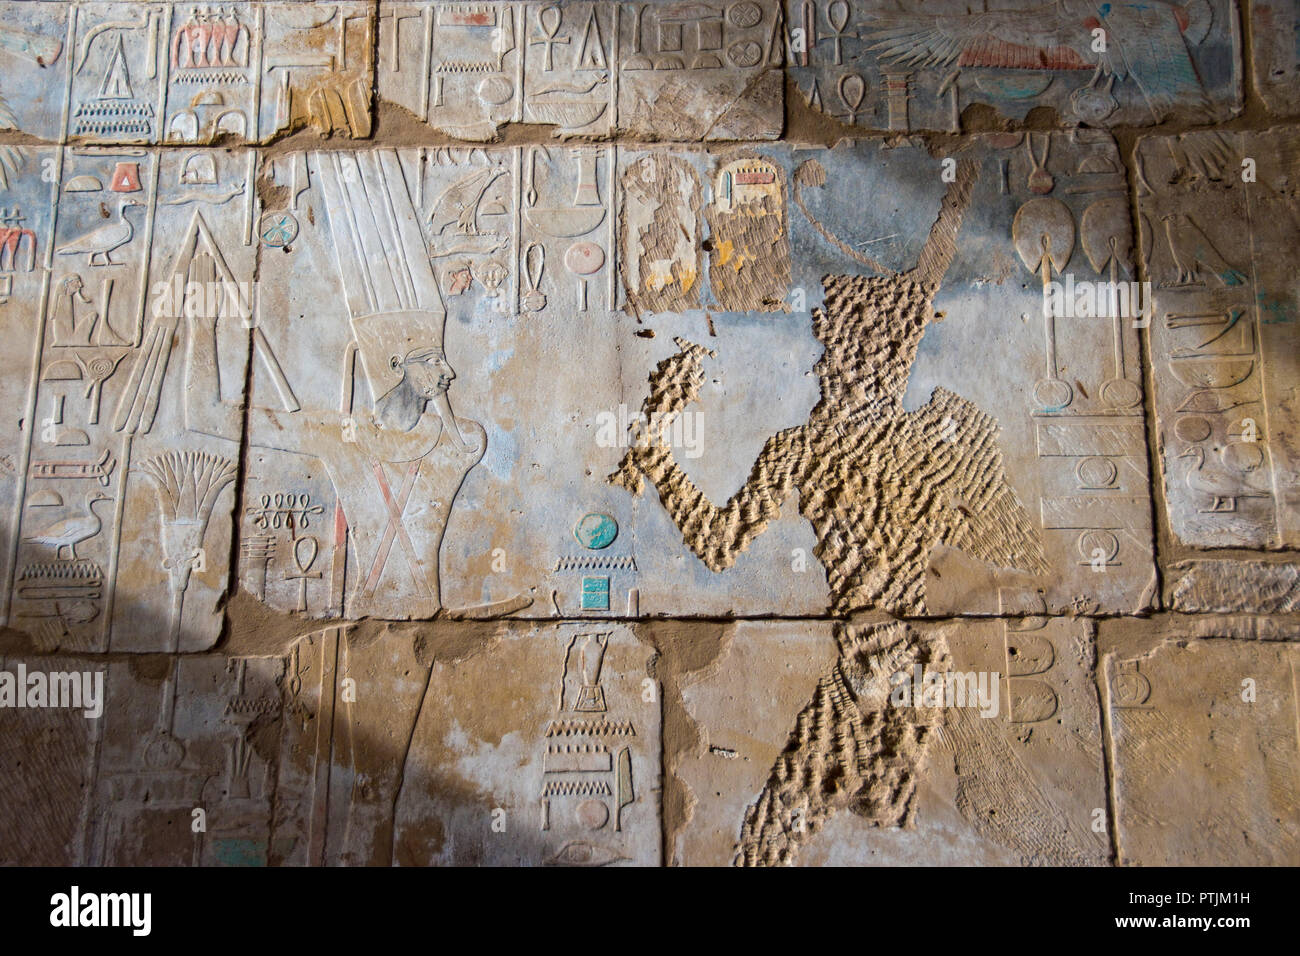 Early Christians defaced many of the brightly painted, bas relief stone images of Egyptian gods and pharaohs inside Karnak Temple at Luxor, Egypt. Stock Photo